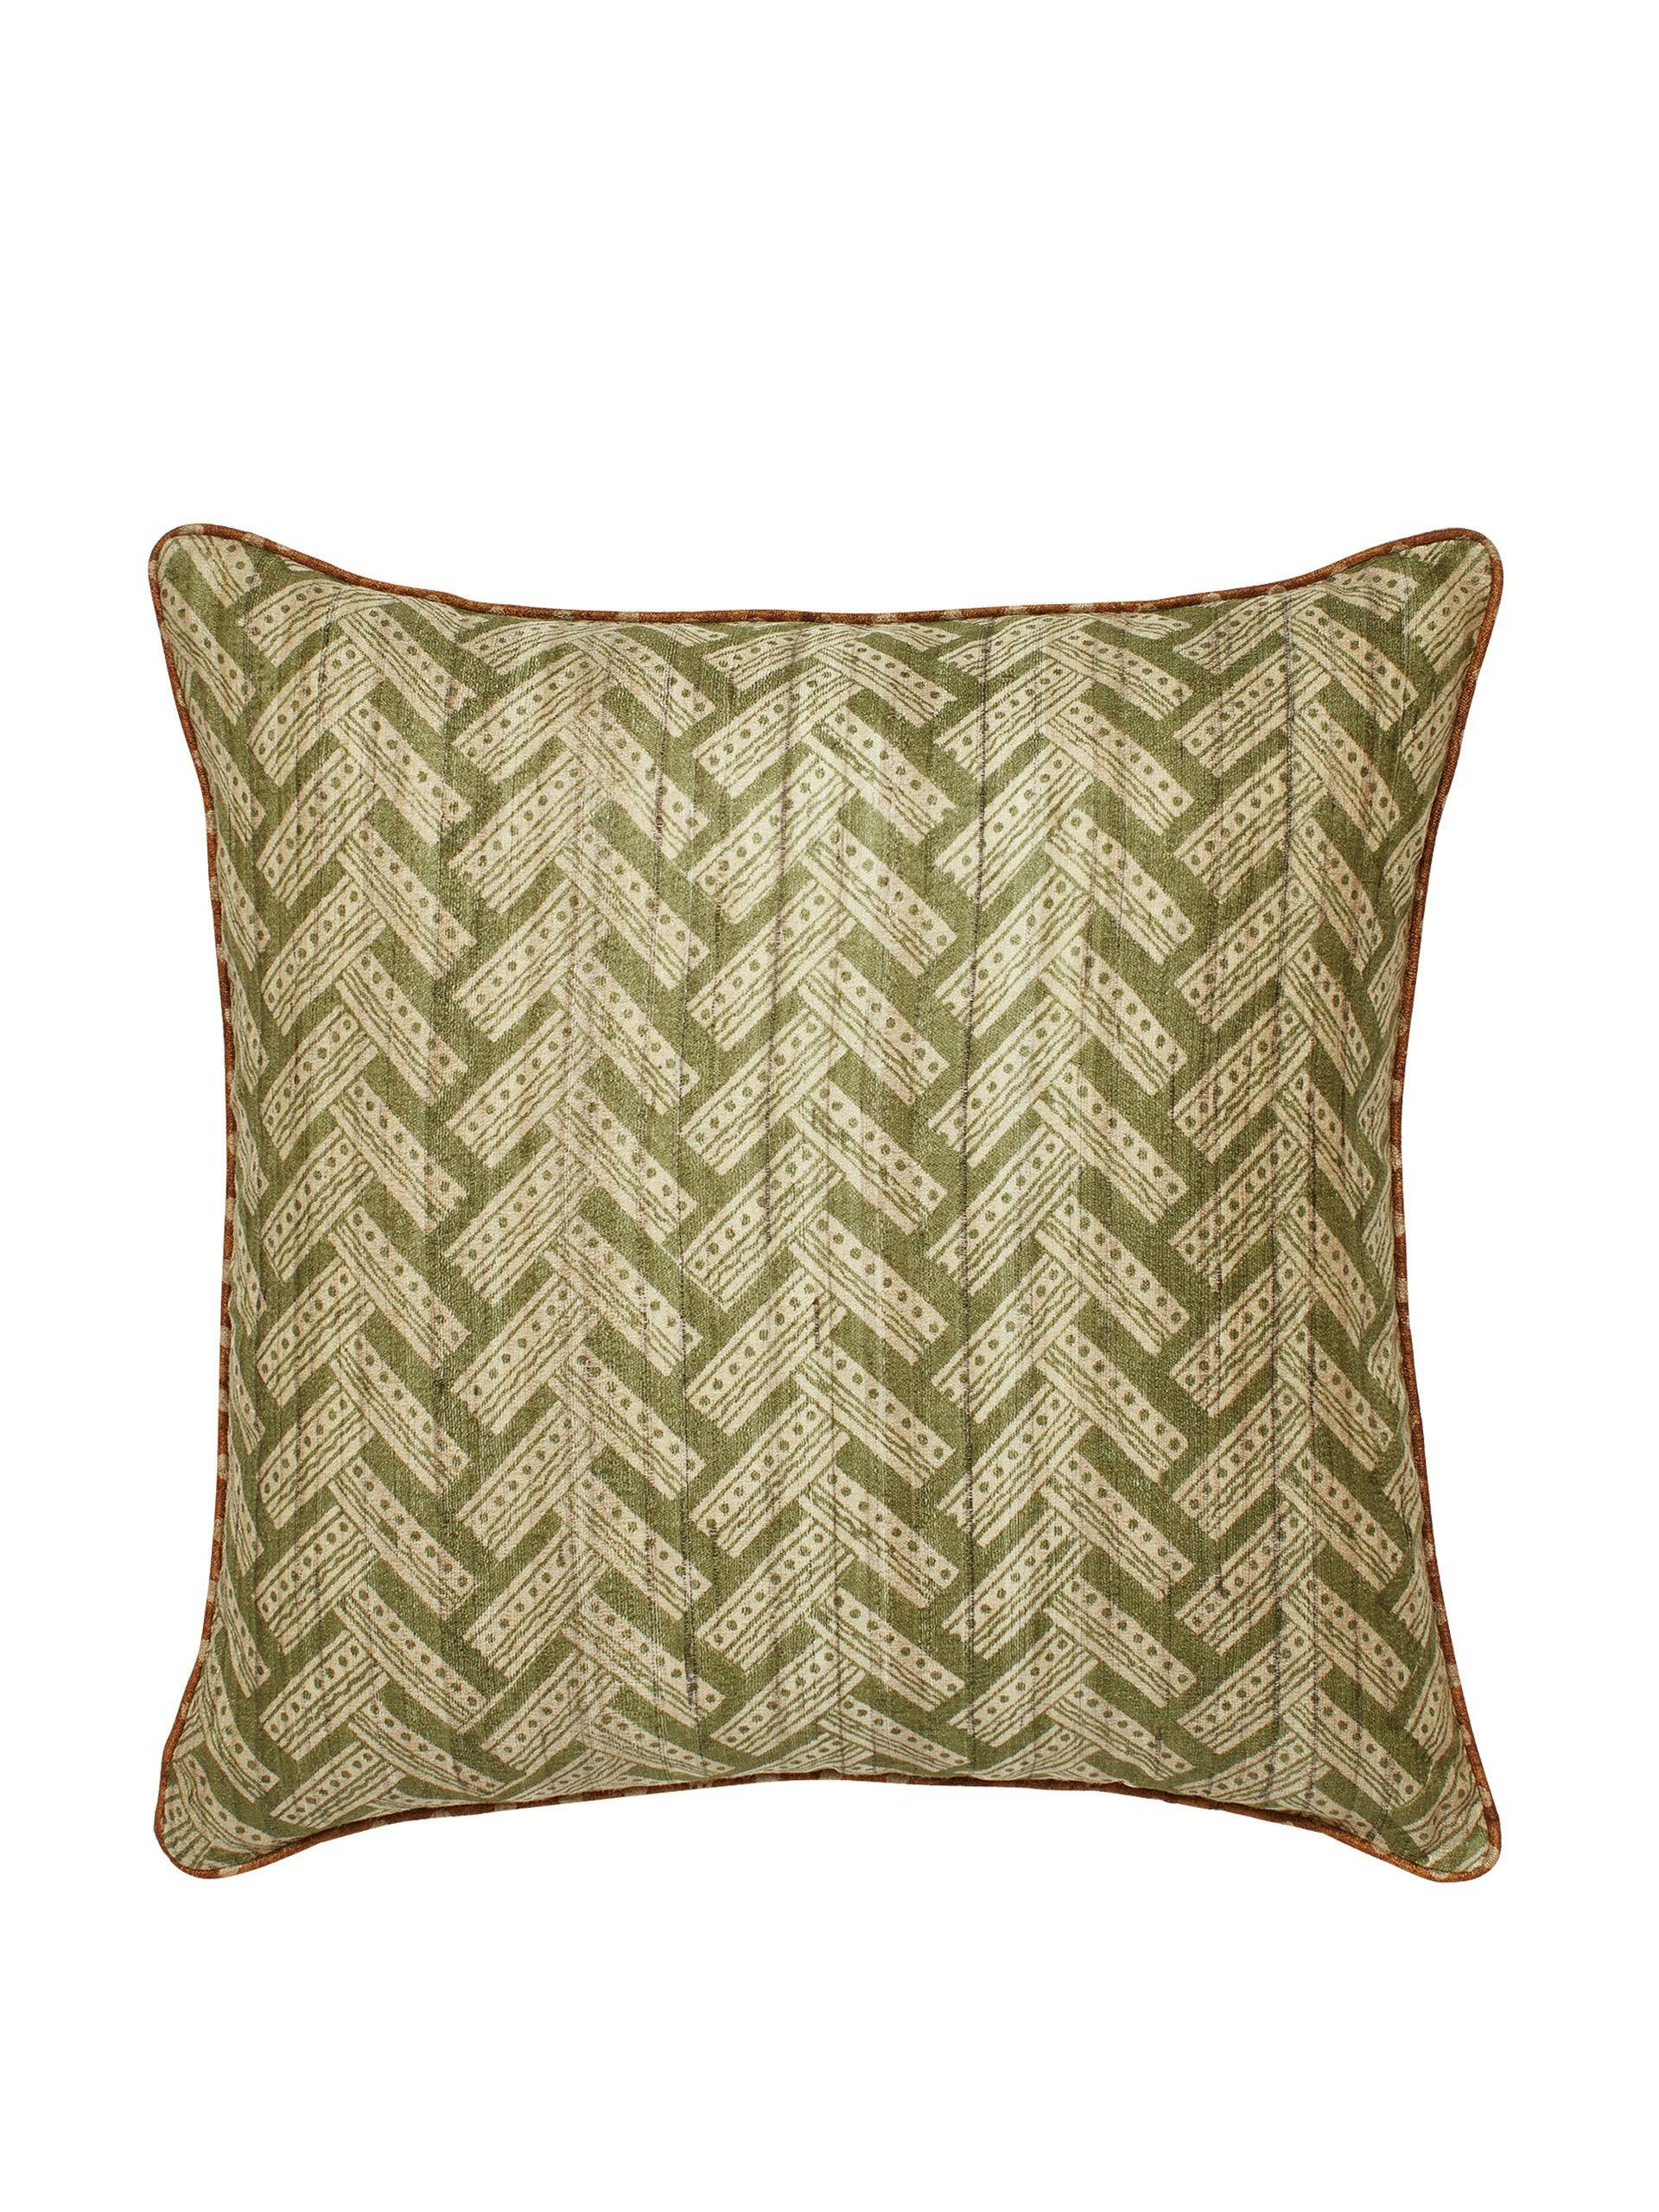 Green and Ochre spot cushion cover